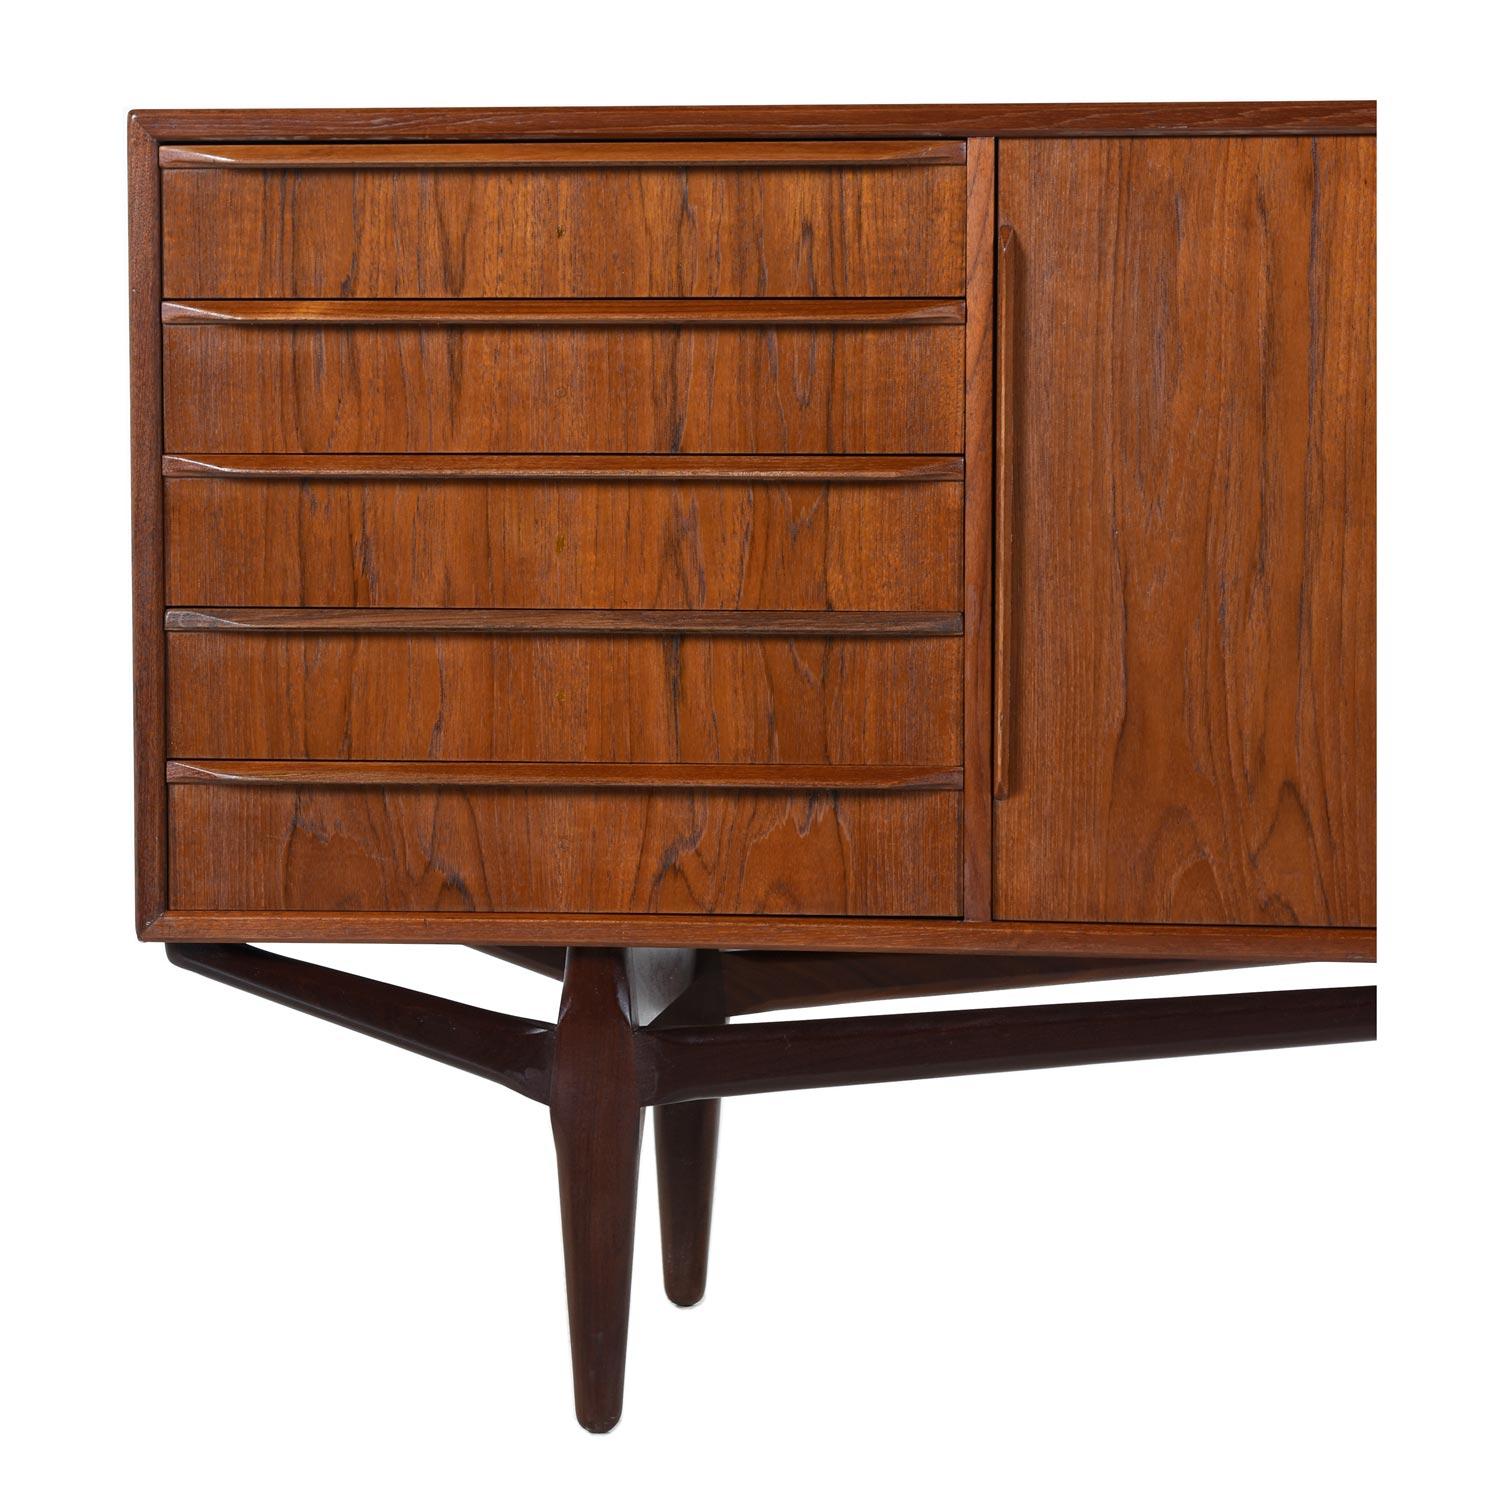 Mid-20th Century Early Danish Teak Credenza Sideboard with Finished Back & Sculpted Rosewood Base